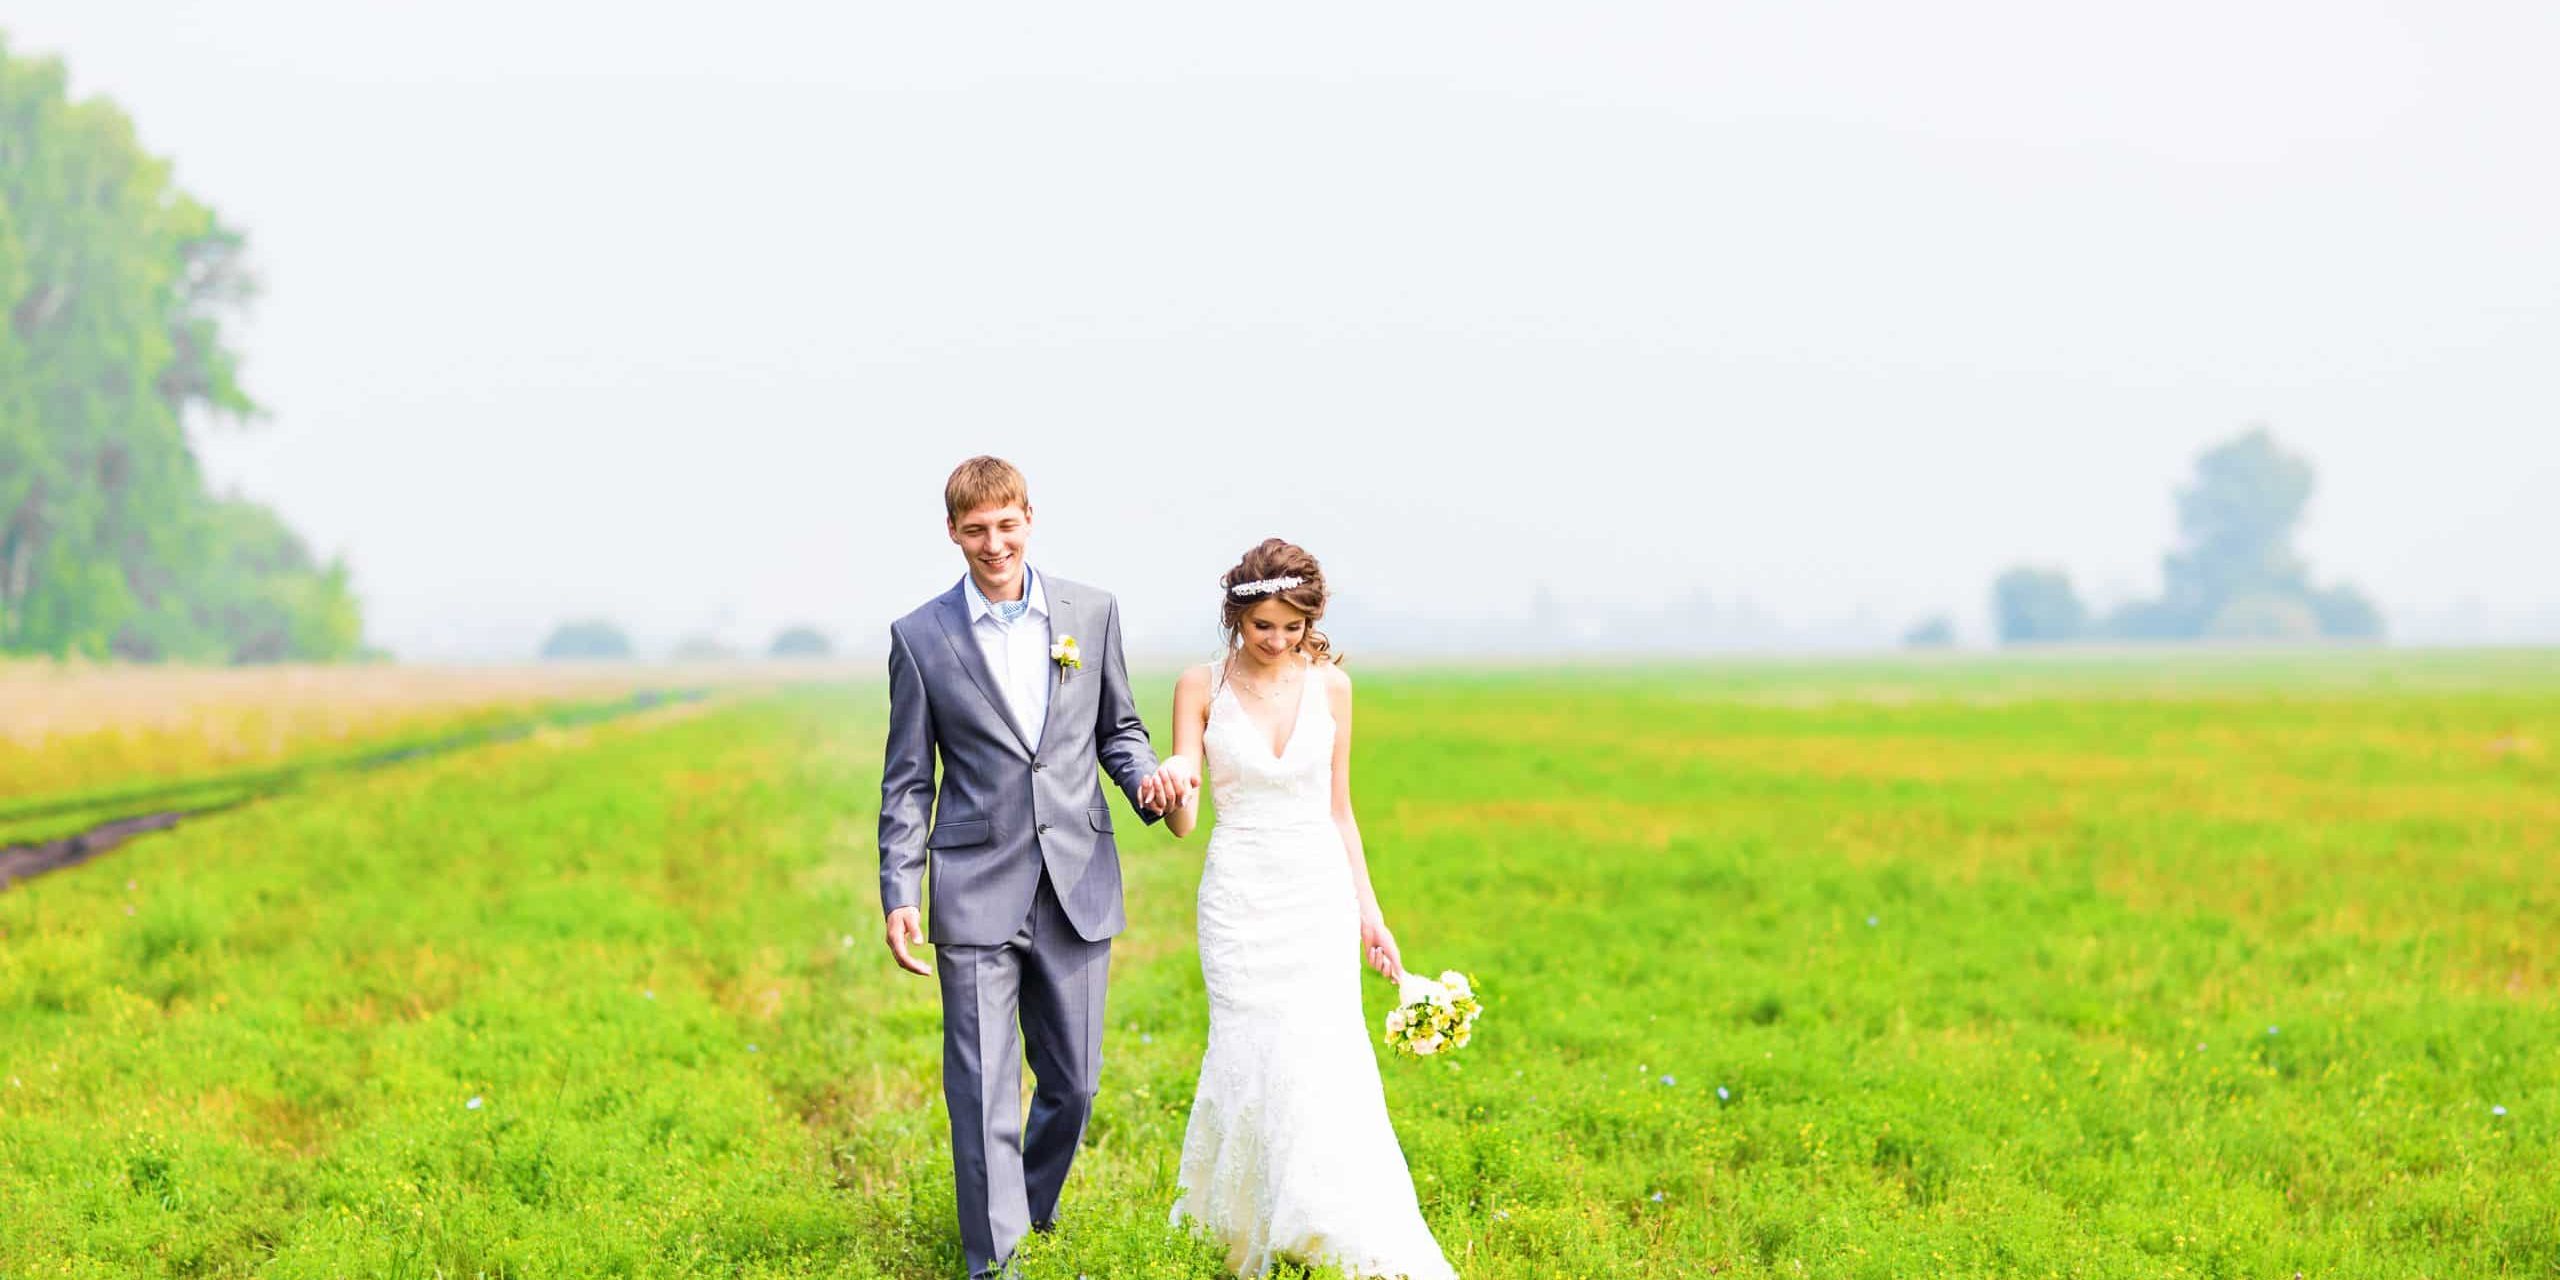 A young couple in love bride and groom, wedding day in summer. Enjoy a moment of happiness and love in a  field. Bride in a luxurious wedding dress on a background bright blue sky with clouds